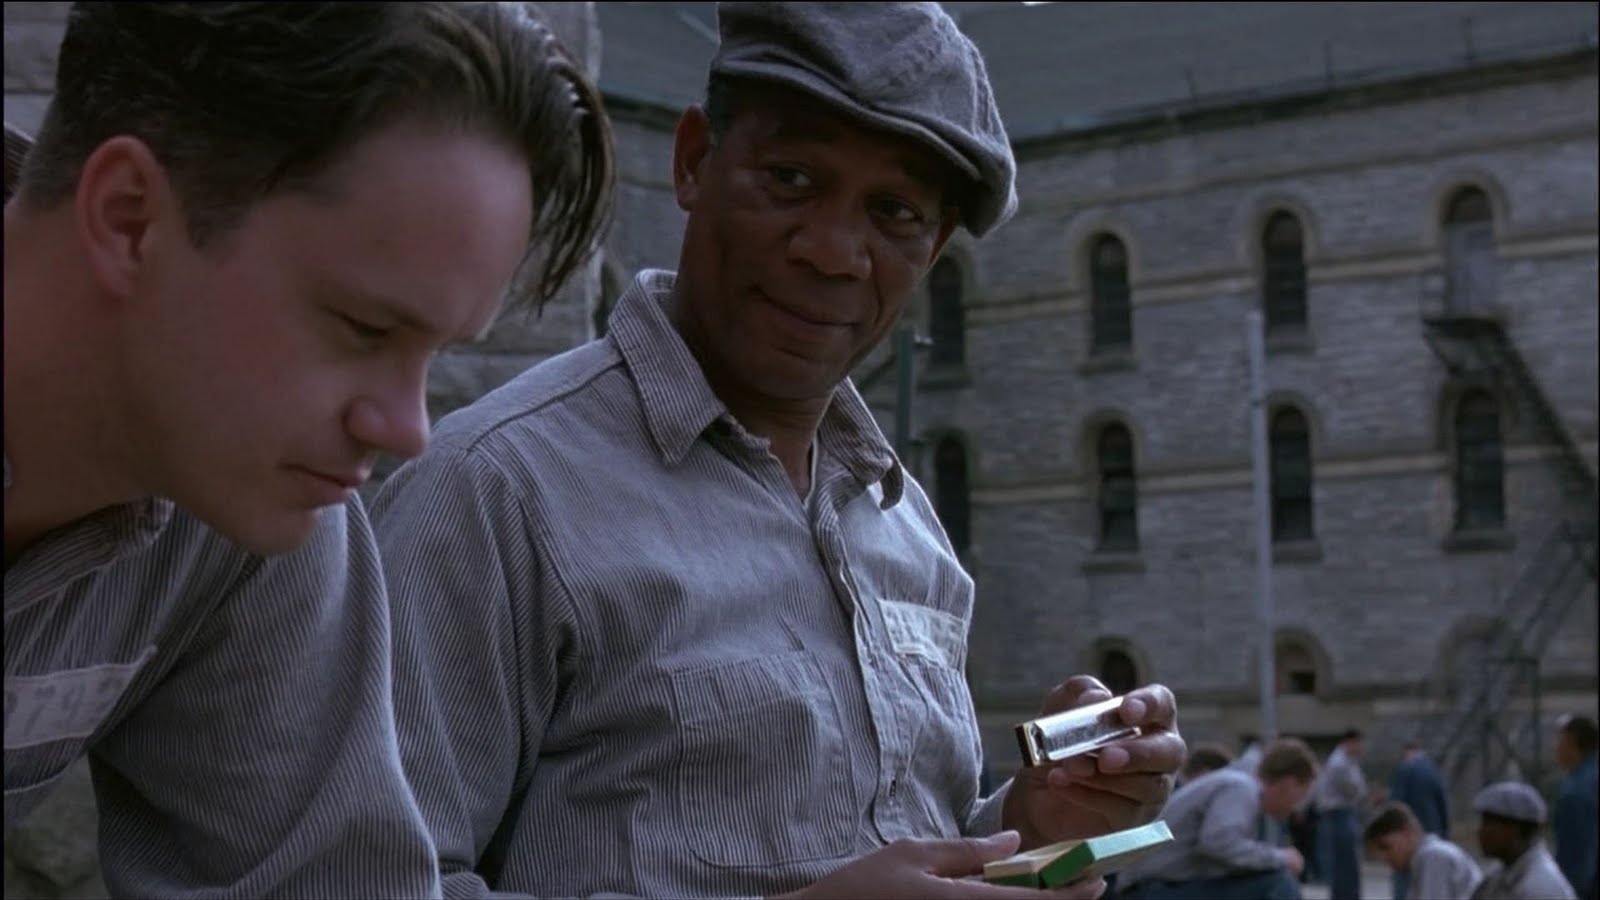 The Shawshank Redemption Ending Explained